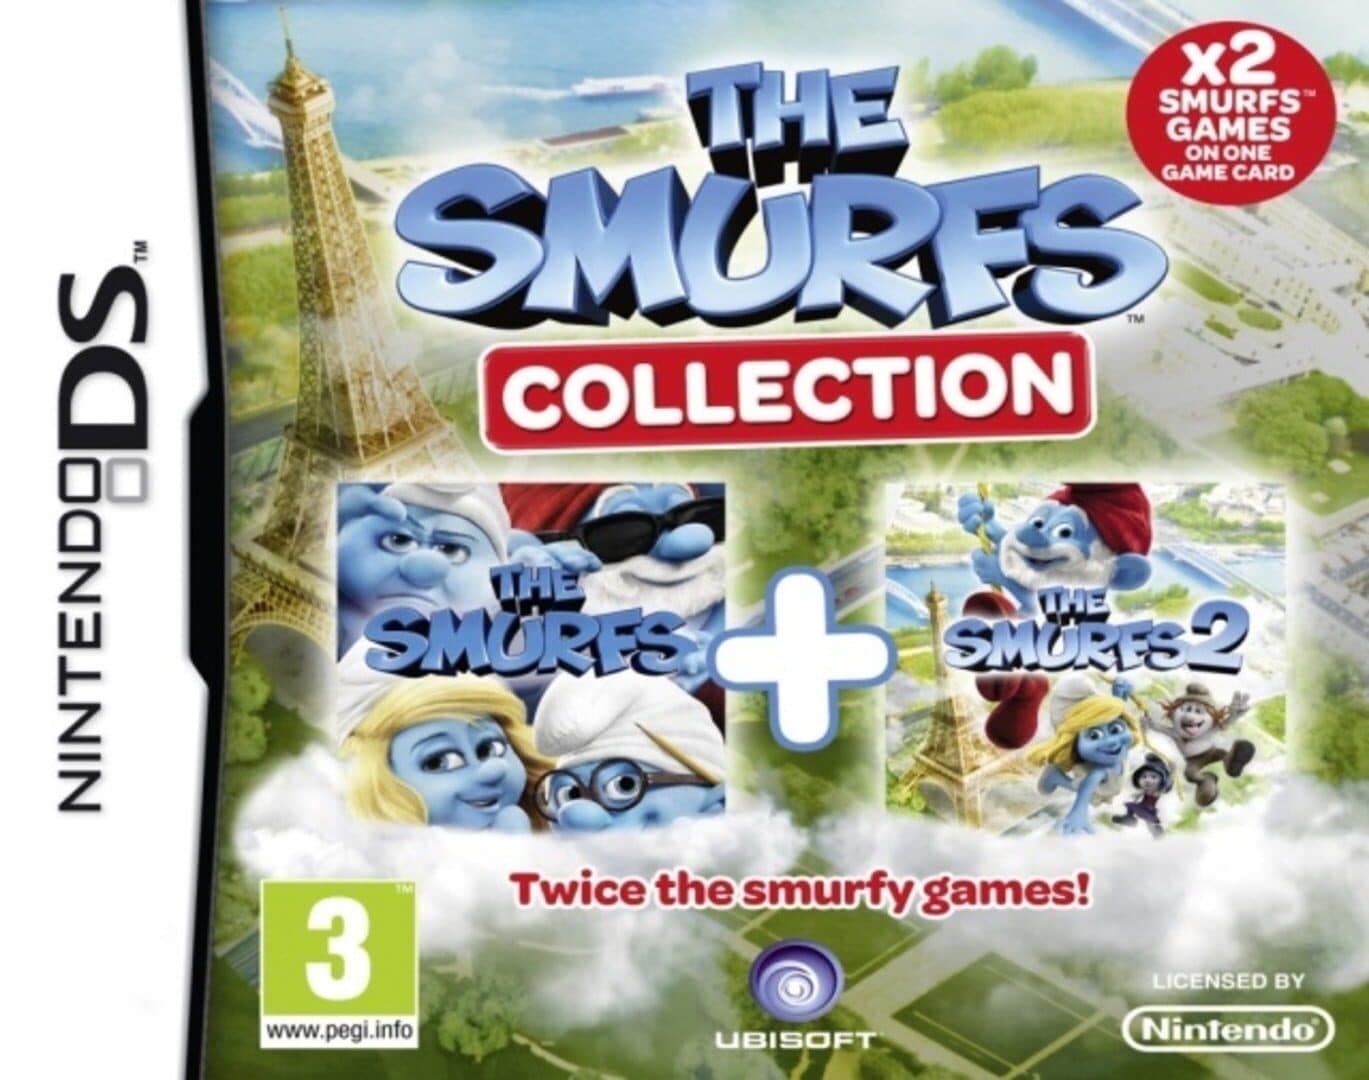 The Smurfs Collection cover art